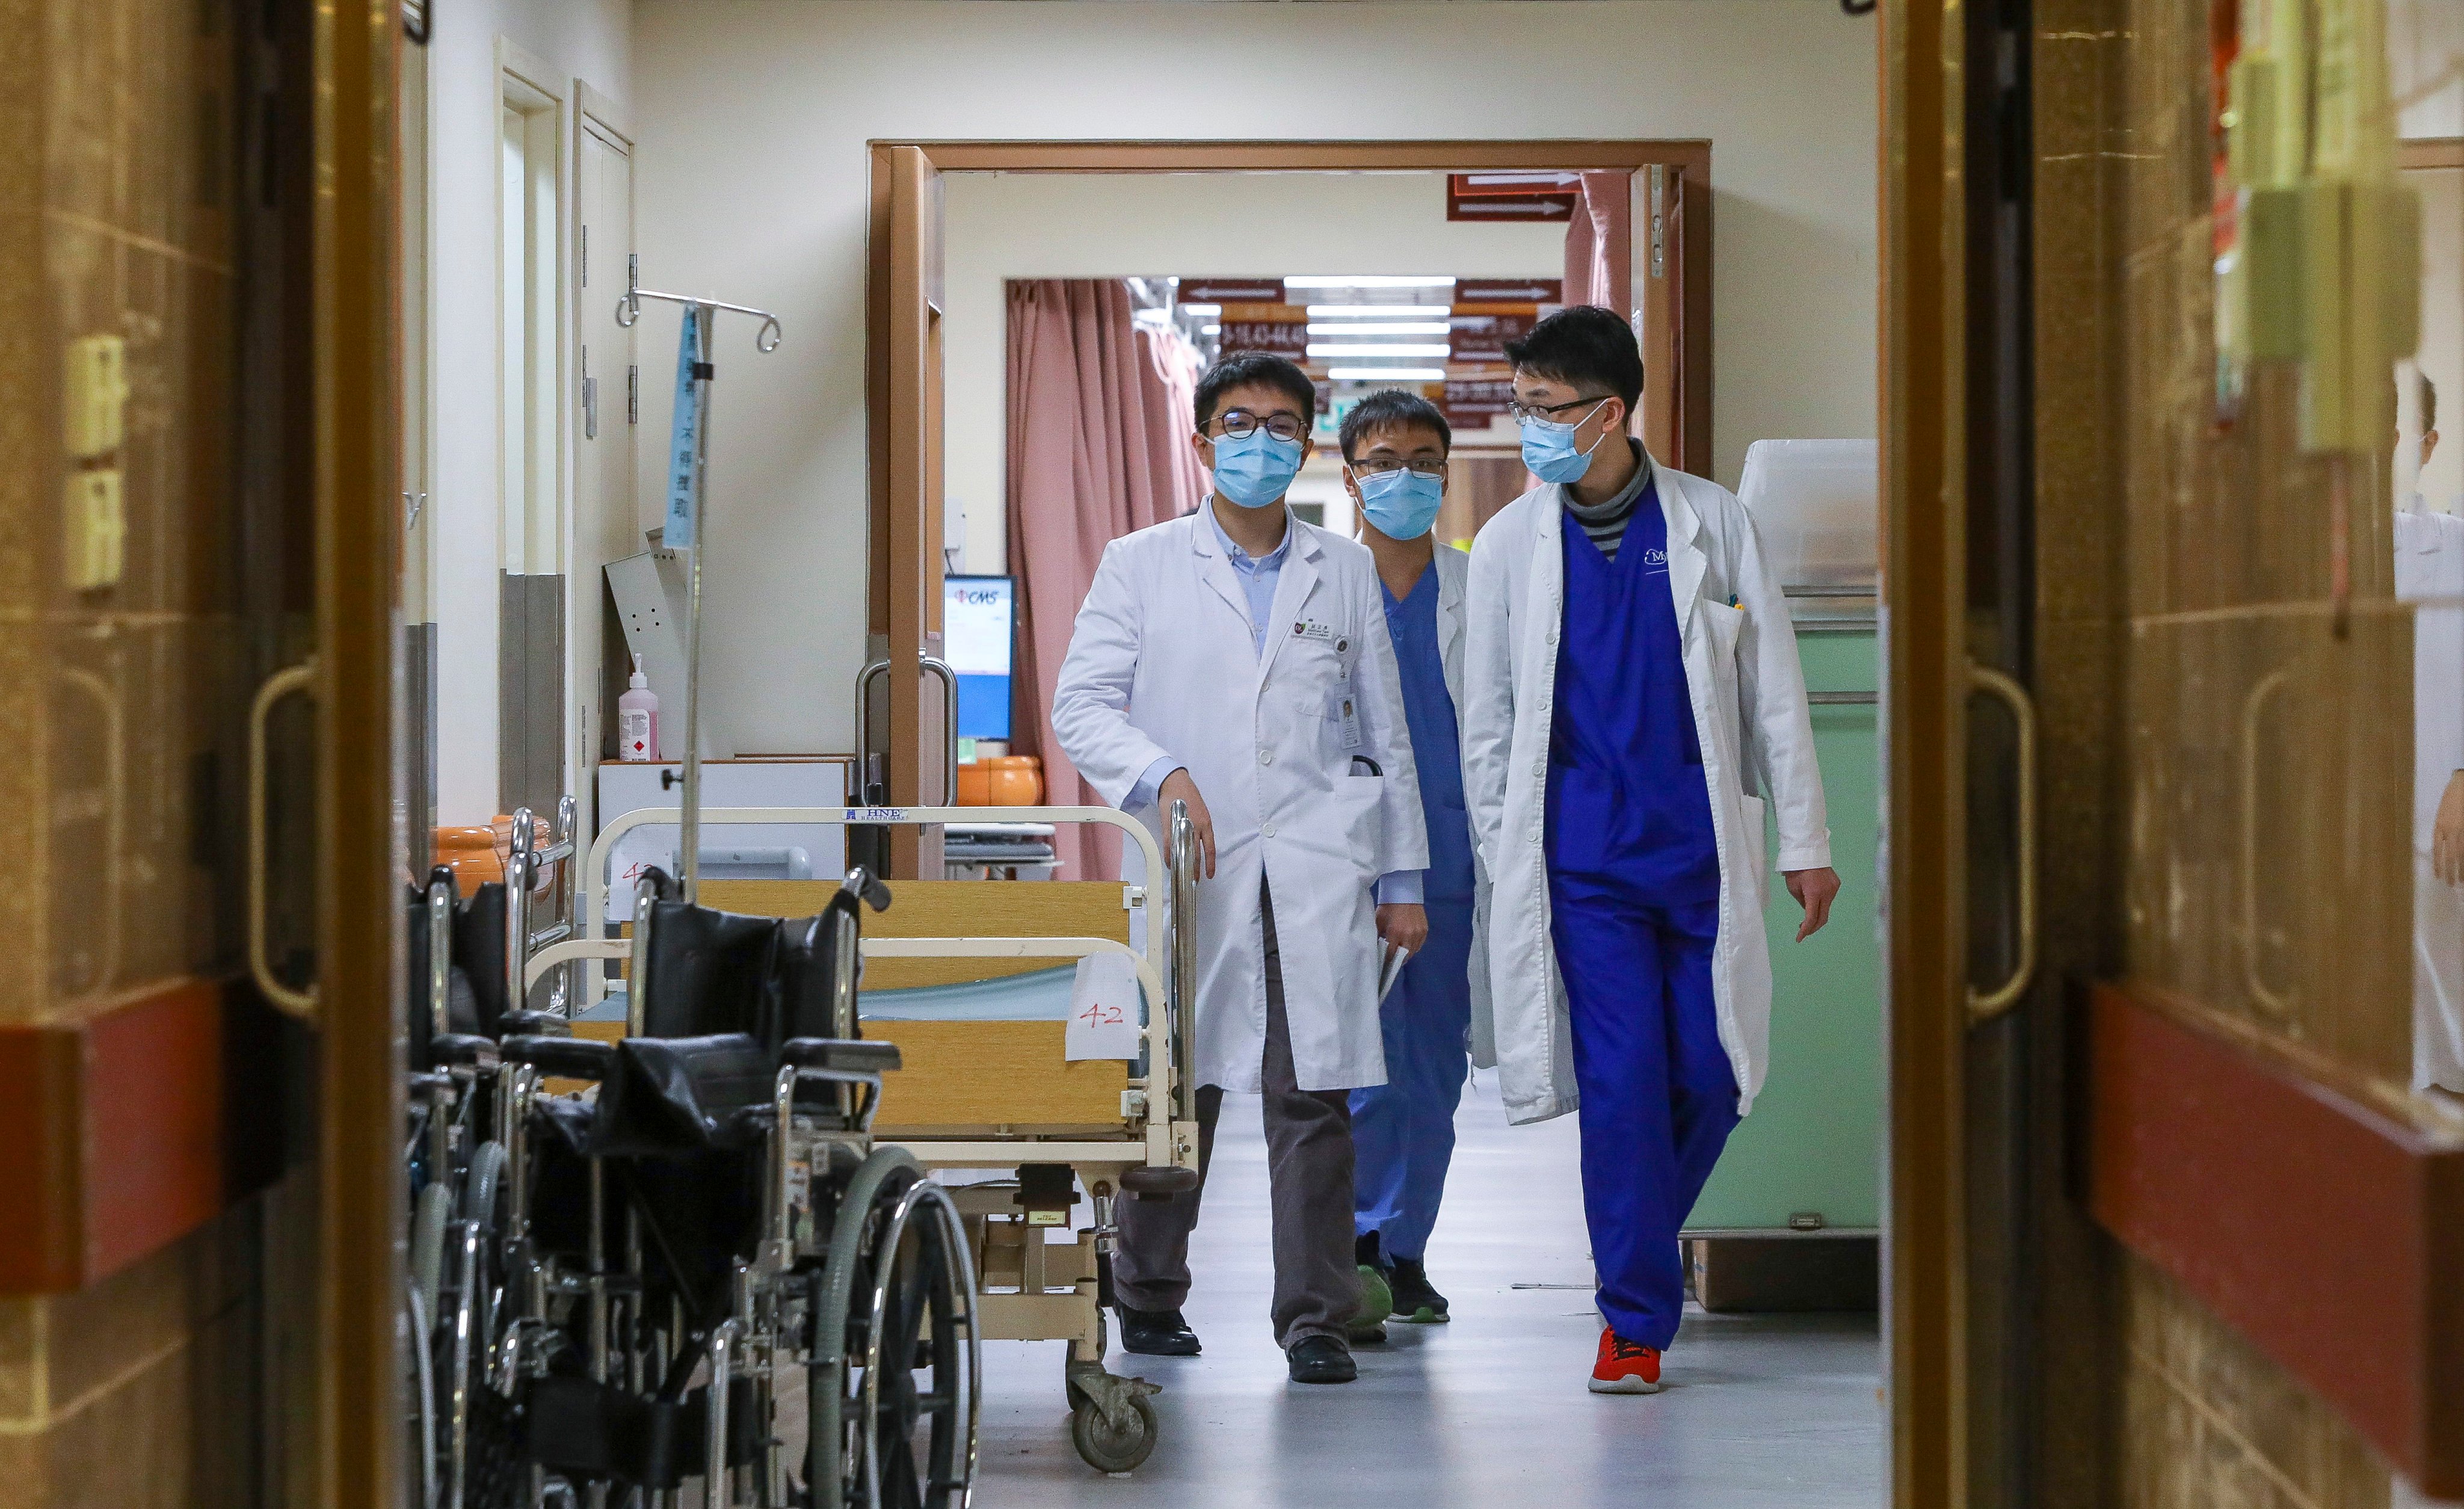 About 20 UK-trained doctors will start work in Hong Kong later this year as the Hospital Authority works to ease staffing problems. Photo: Sam Tsang